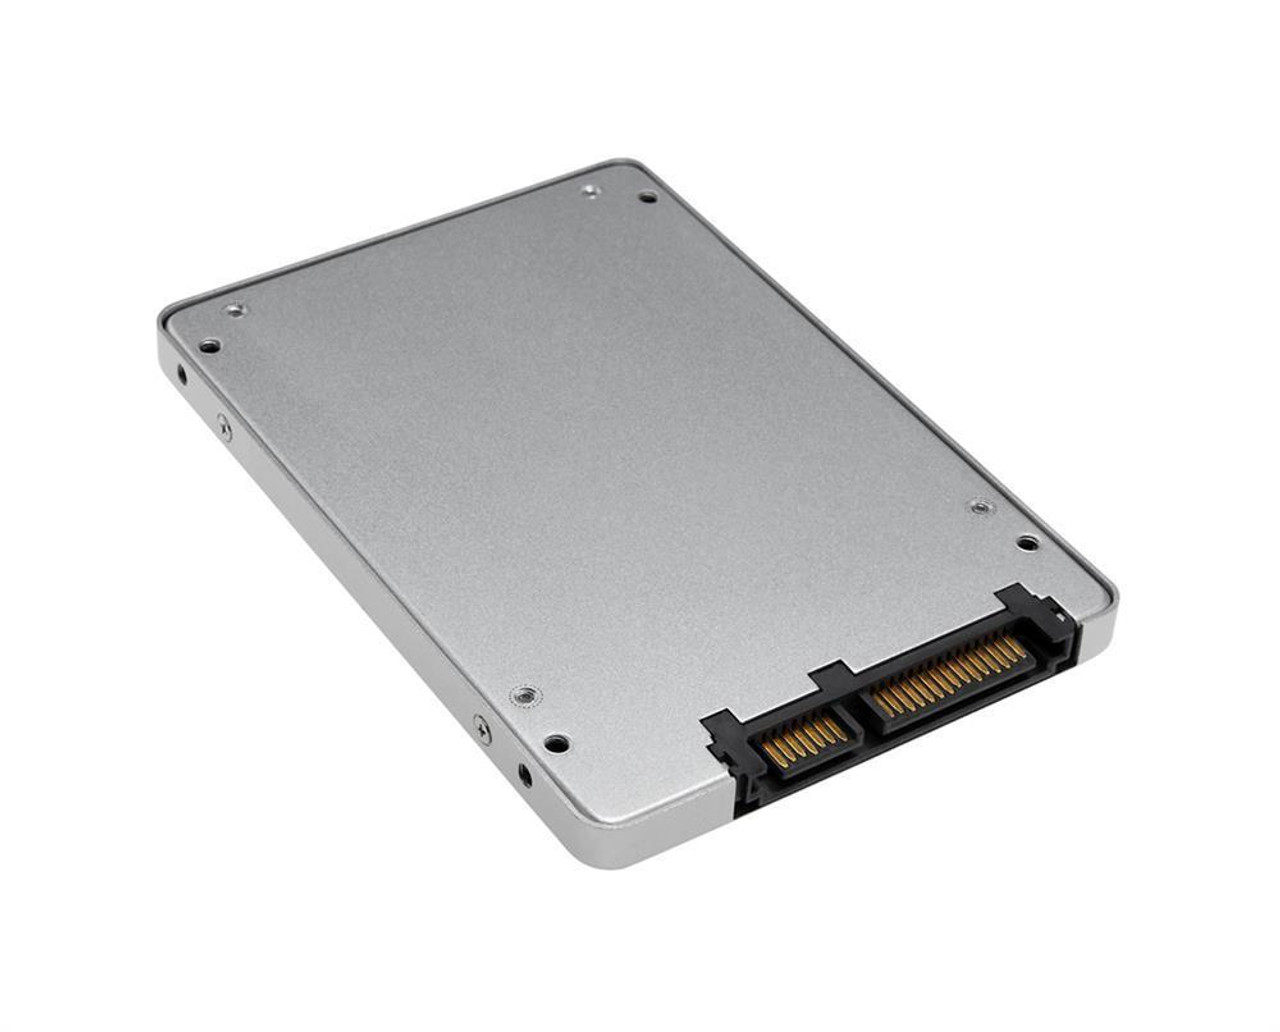 03B0100020900 ASUS 256GB SATA 6Gbps 2.5-inch Internal Solid State Drive (SSD)